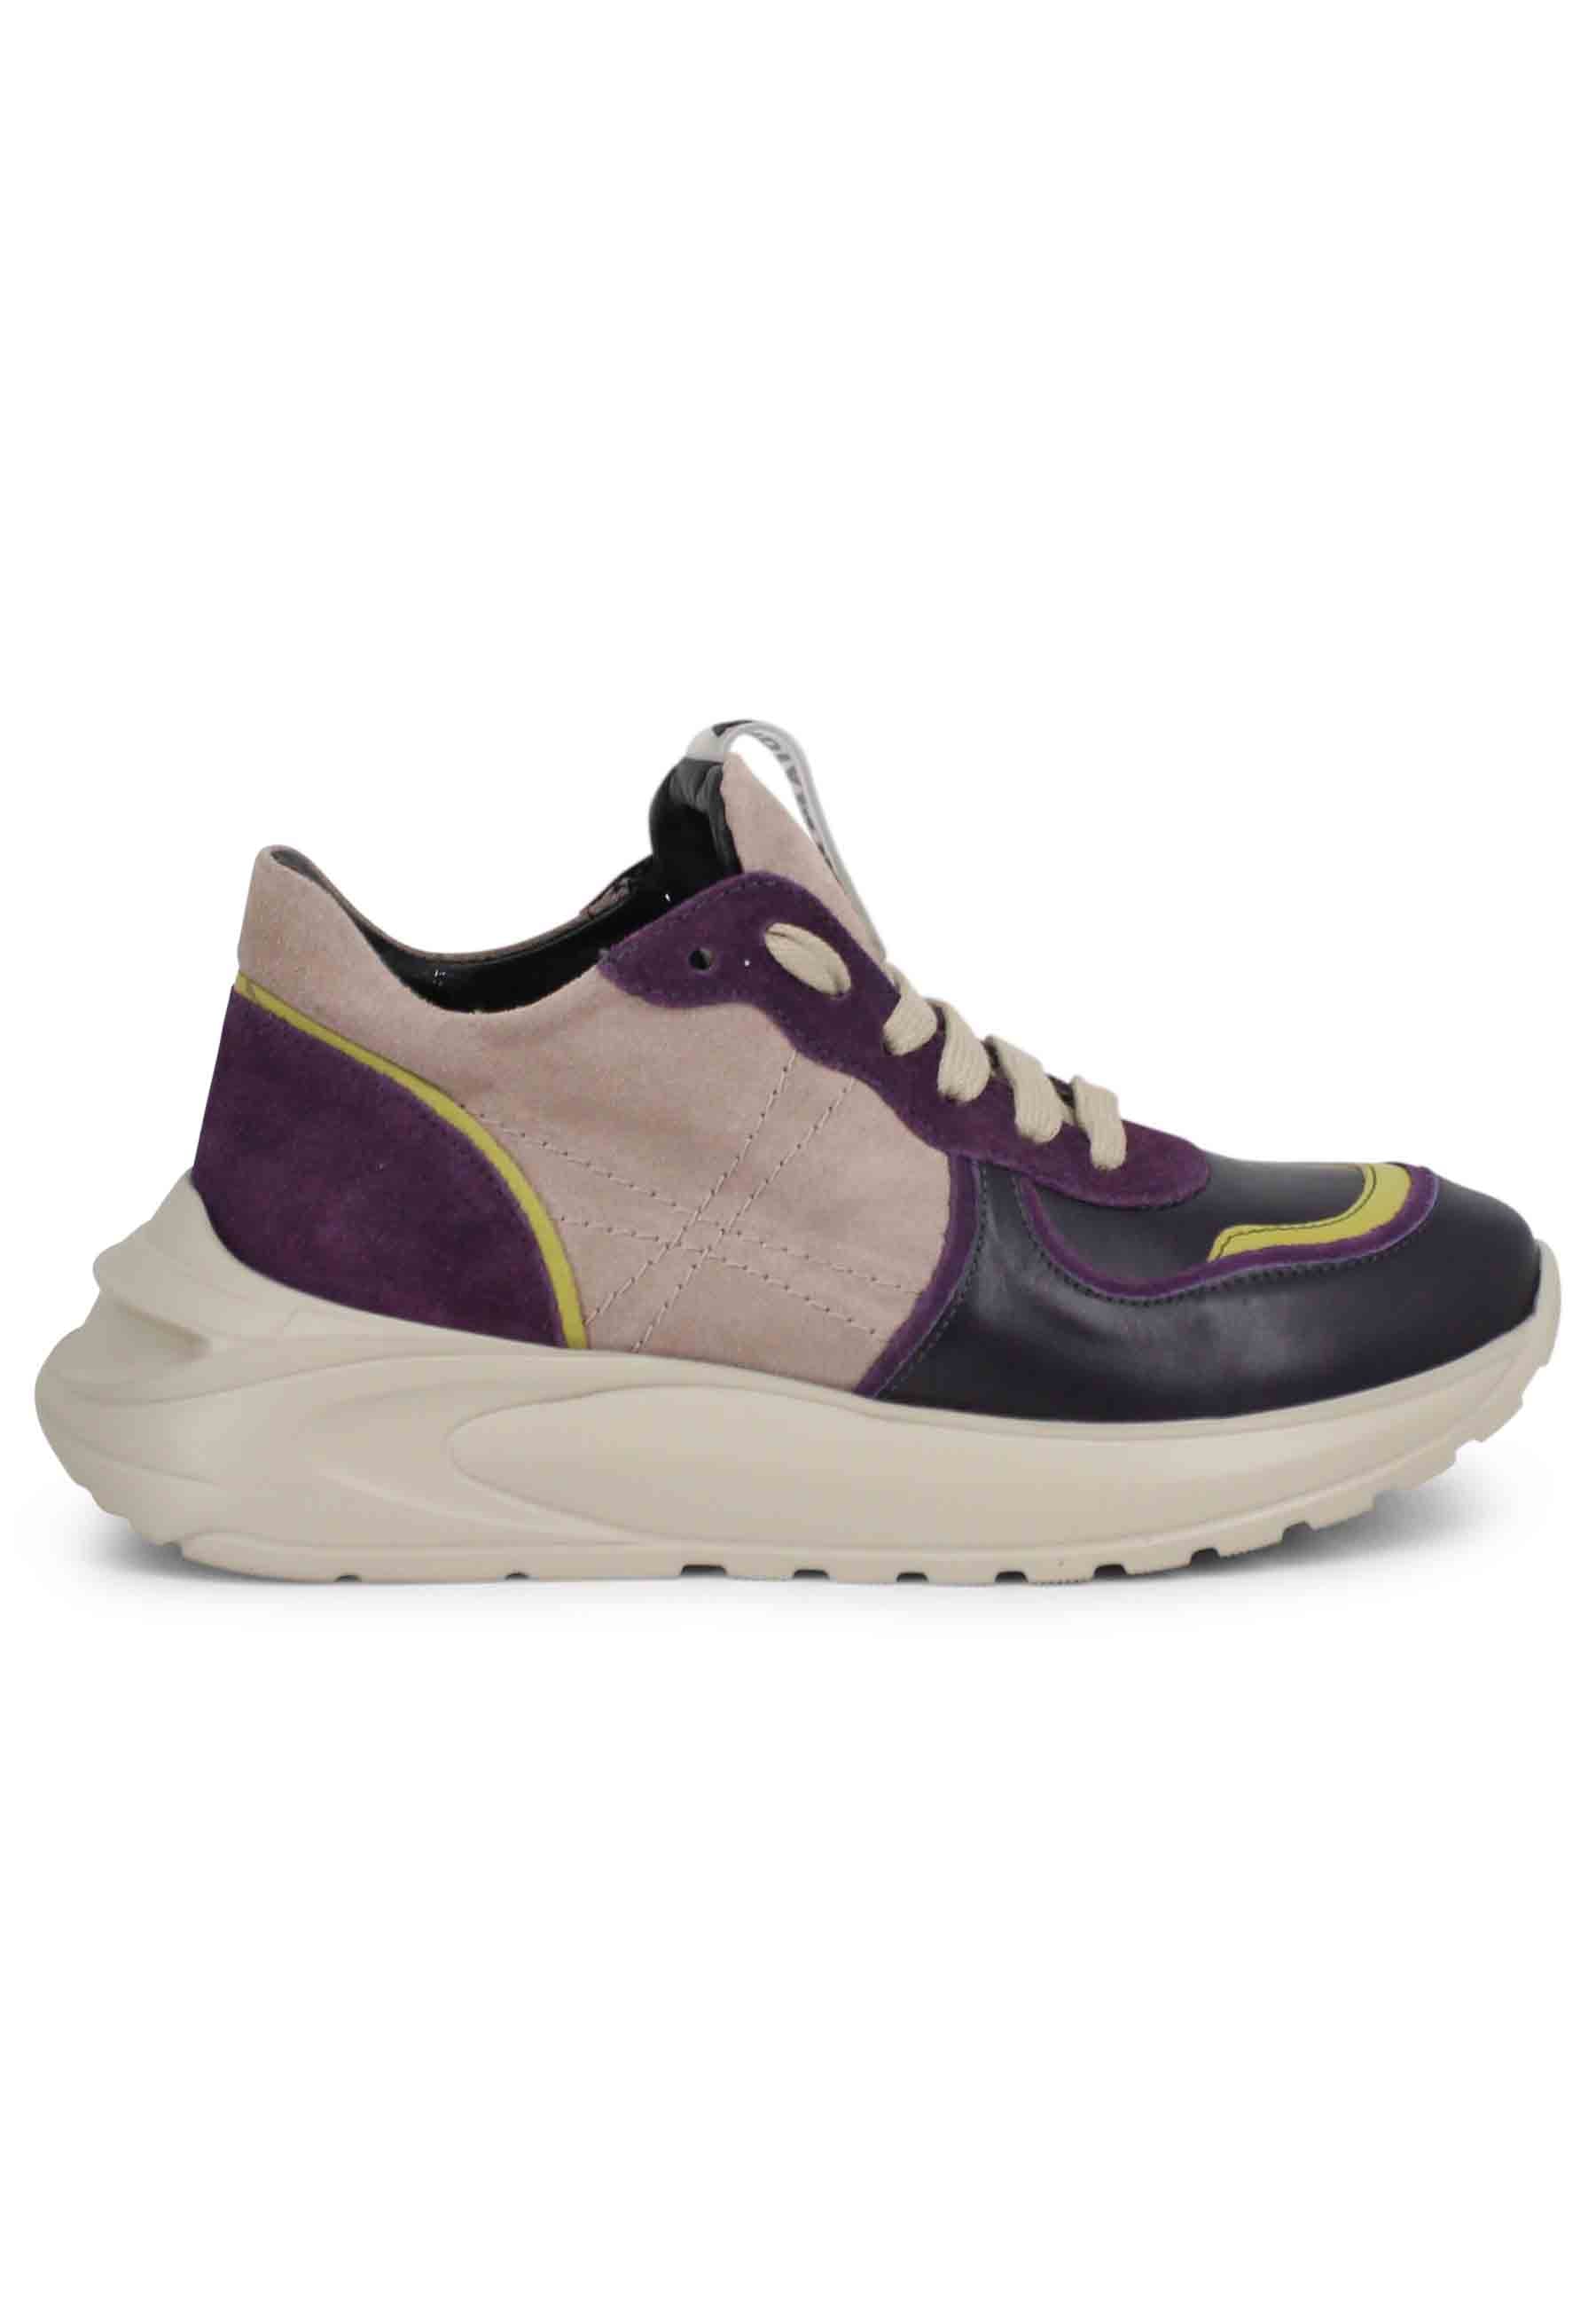 Women's purple leather sneakers with rubber sole